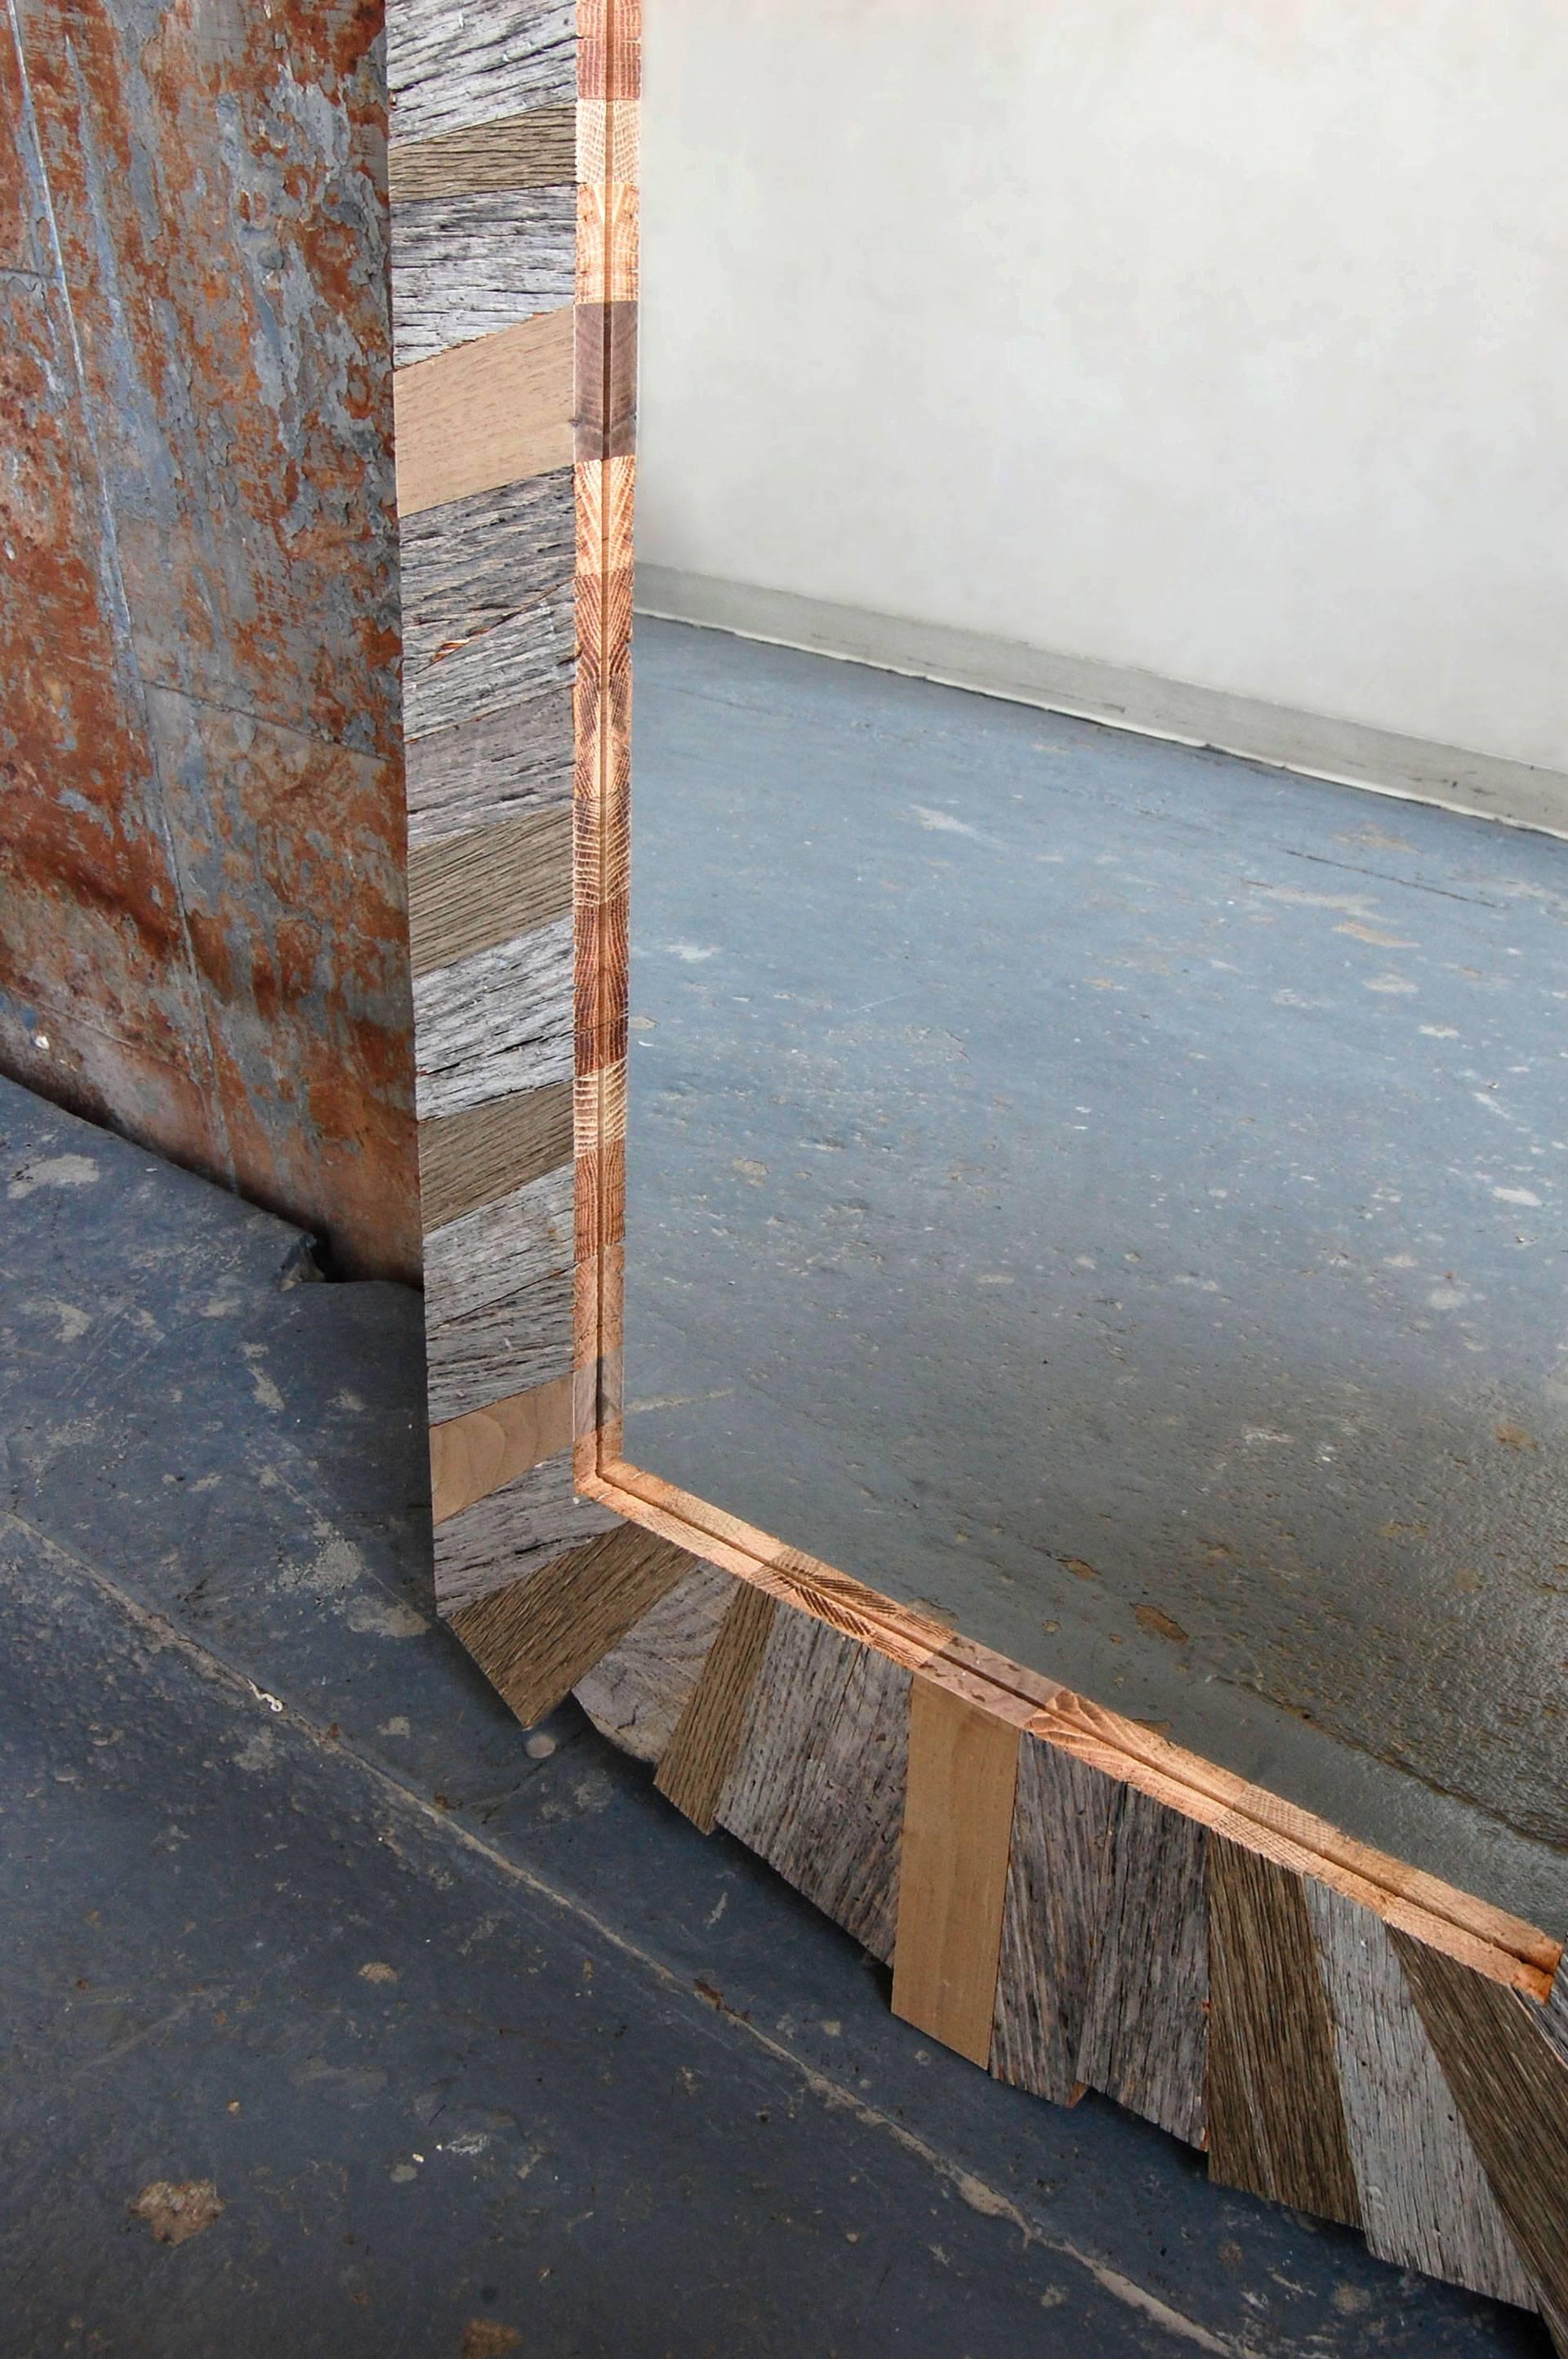 Full-height / full-length mirror with wooden frame crafted from reclaimed wood. Rustic, organic sunburst style design handmade by Gregoire Abrial in Brooklyn as part of the Parquet Series. Can be hung vertically and horizontally. This style of frame